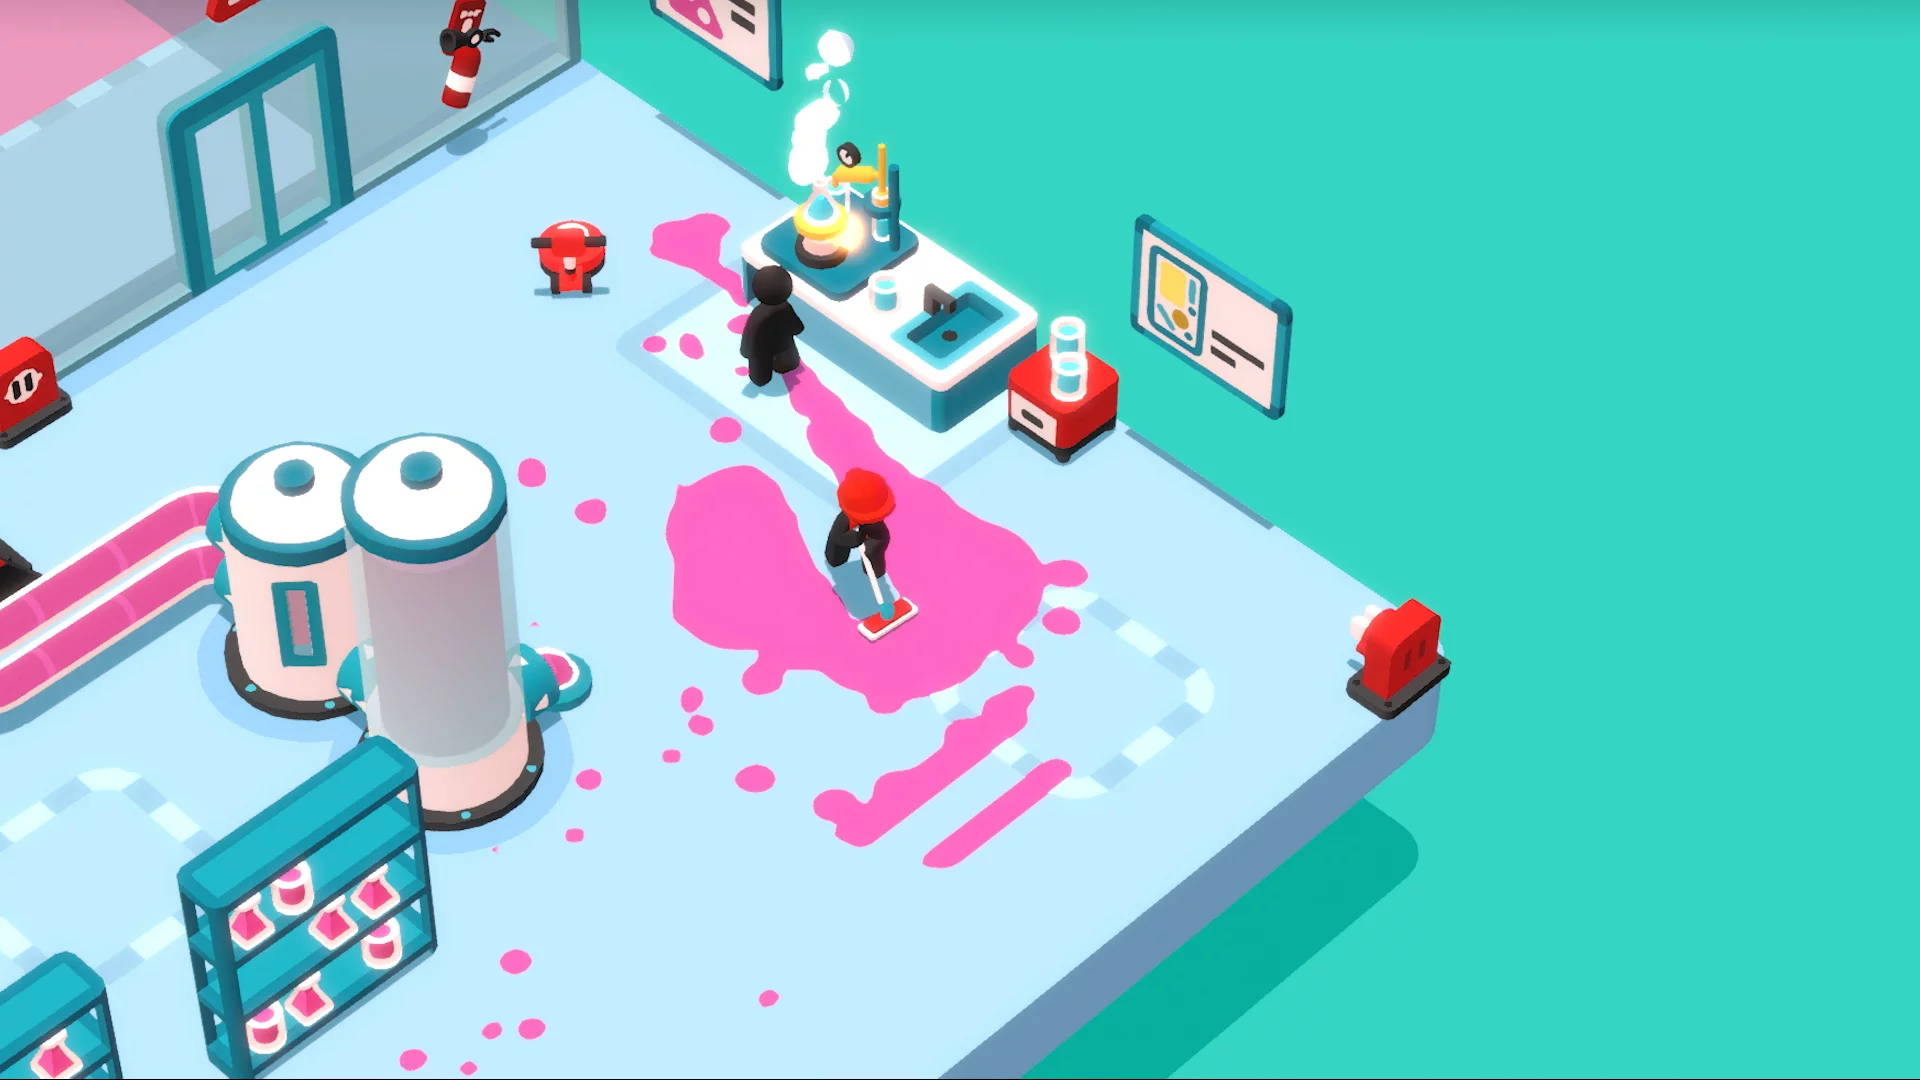 Nintendo launches Good Job!, a chaotic corporate puzzler for Switch